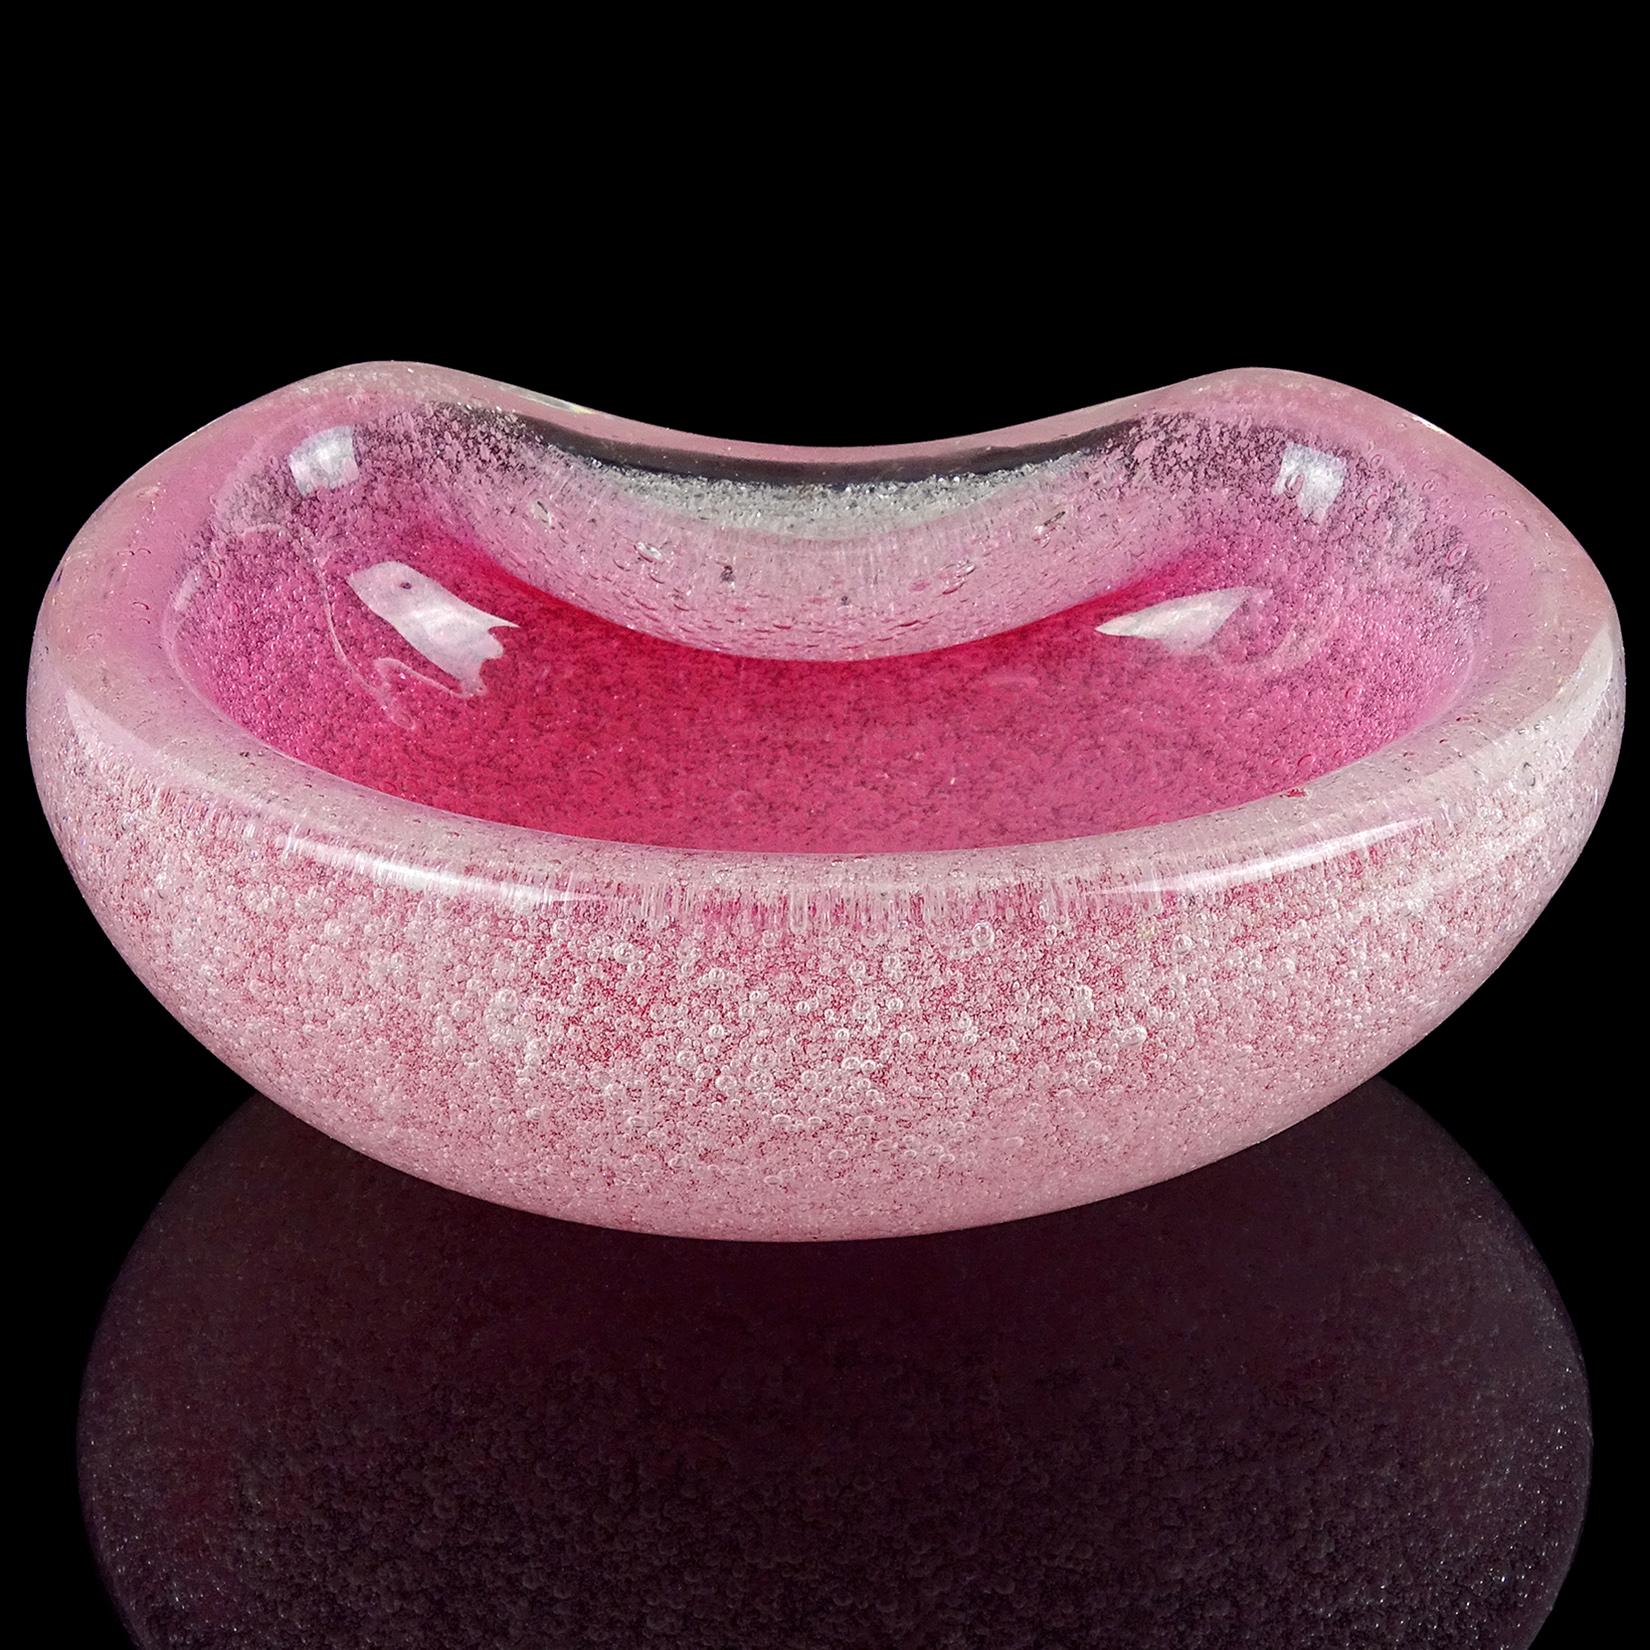 Beautiful Murano hand blown pink and bubbles Italian art glass bowl, vide poche dish. The piece is made in the 